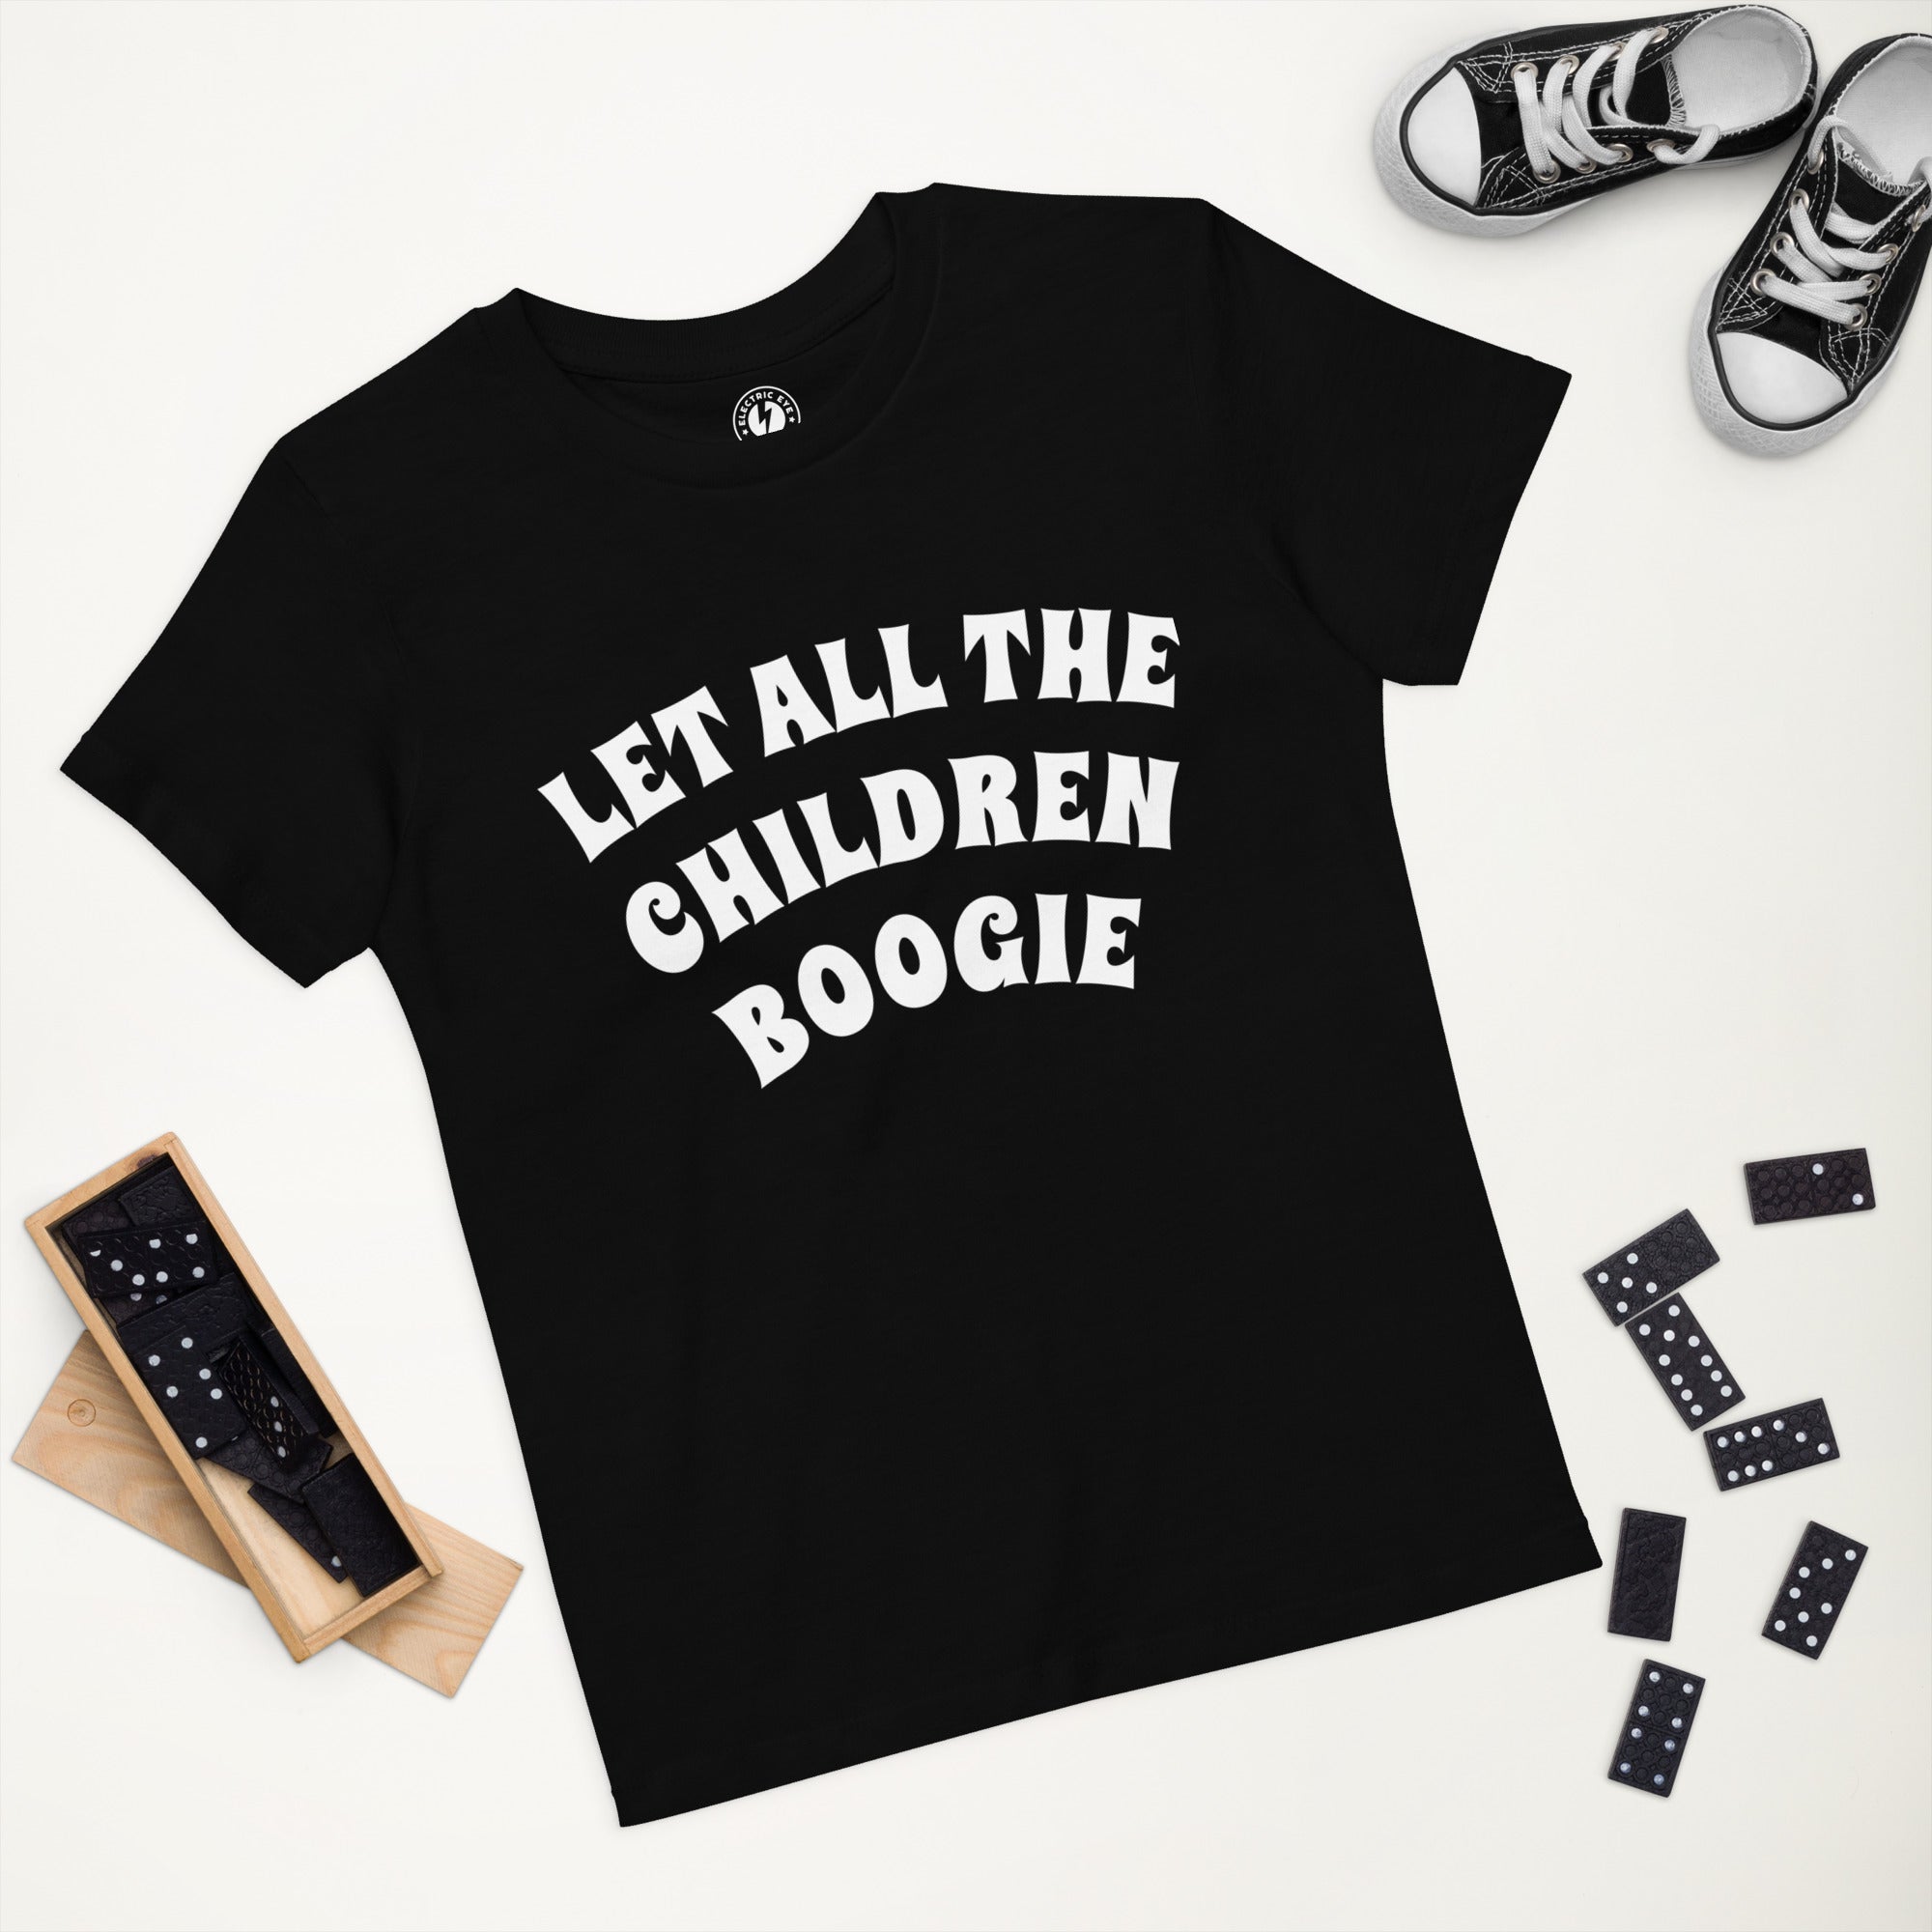 LET ALL THE CHILDREN BOOGIE Printed Organic cotton kids t-shirt - white text